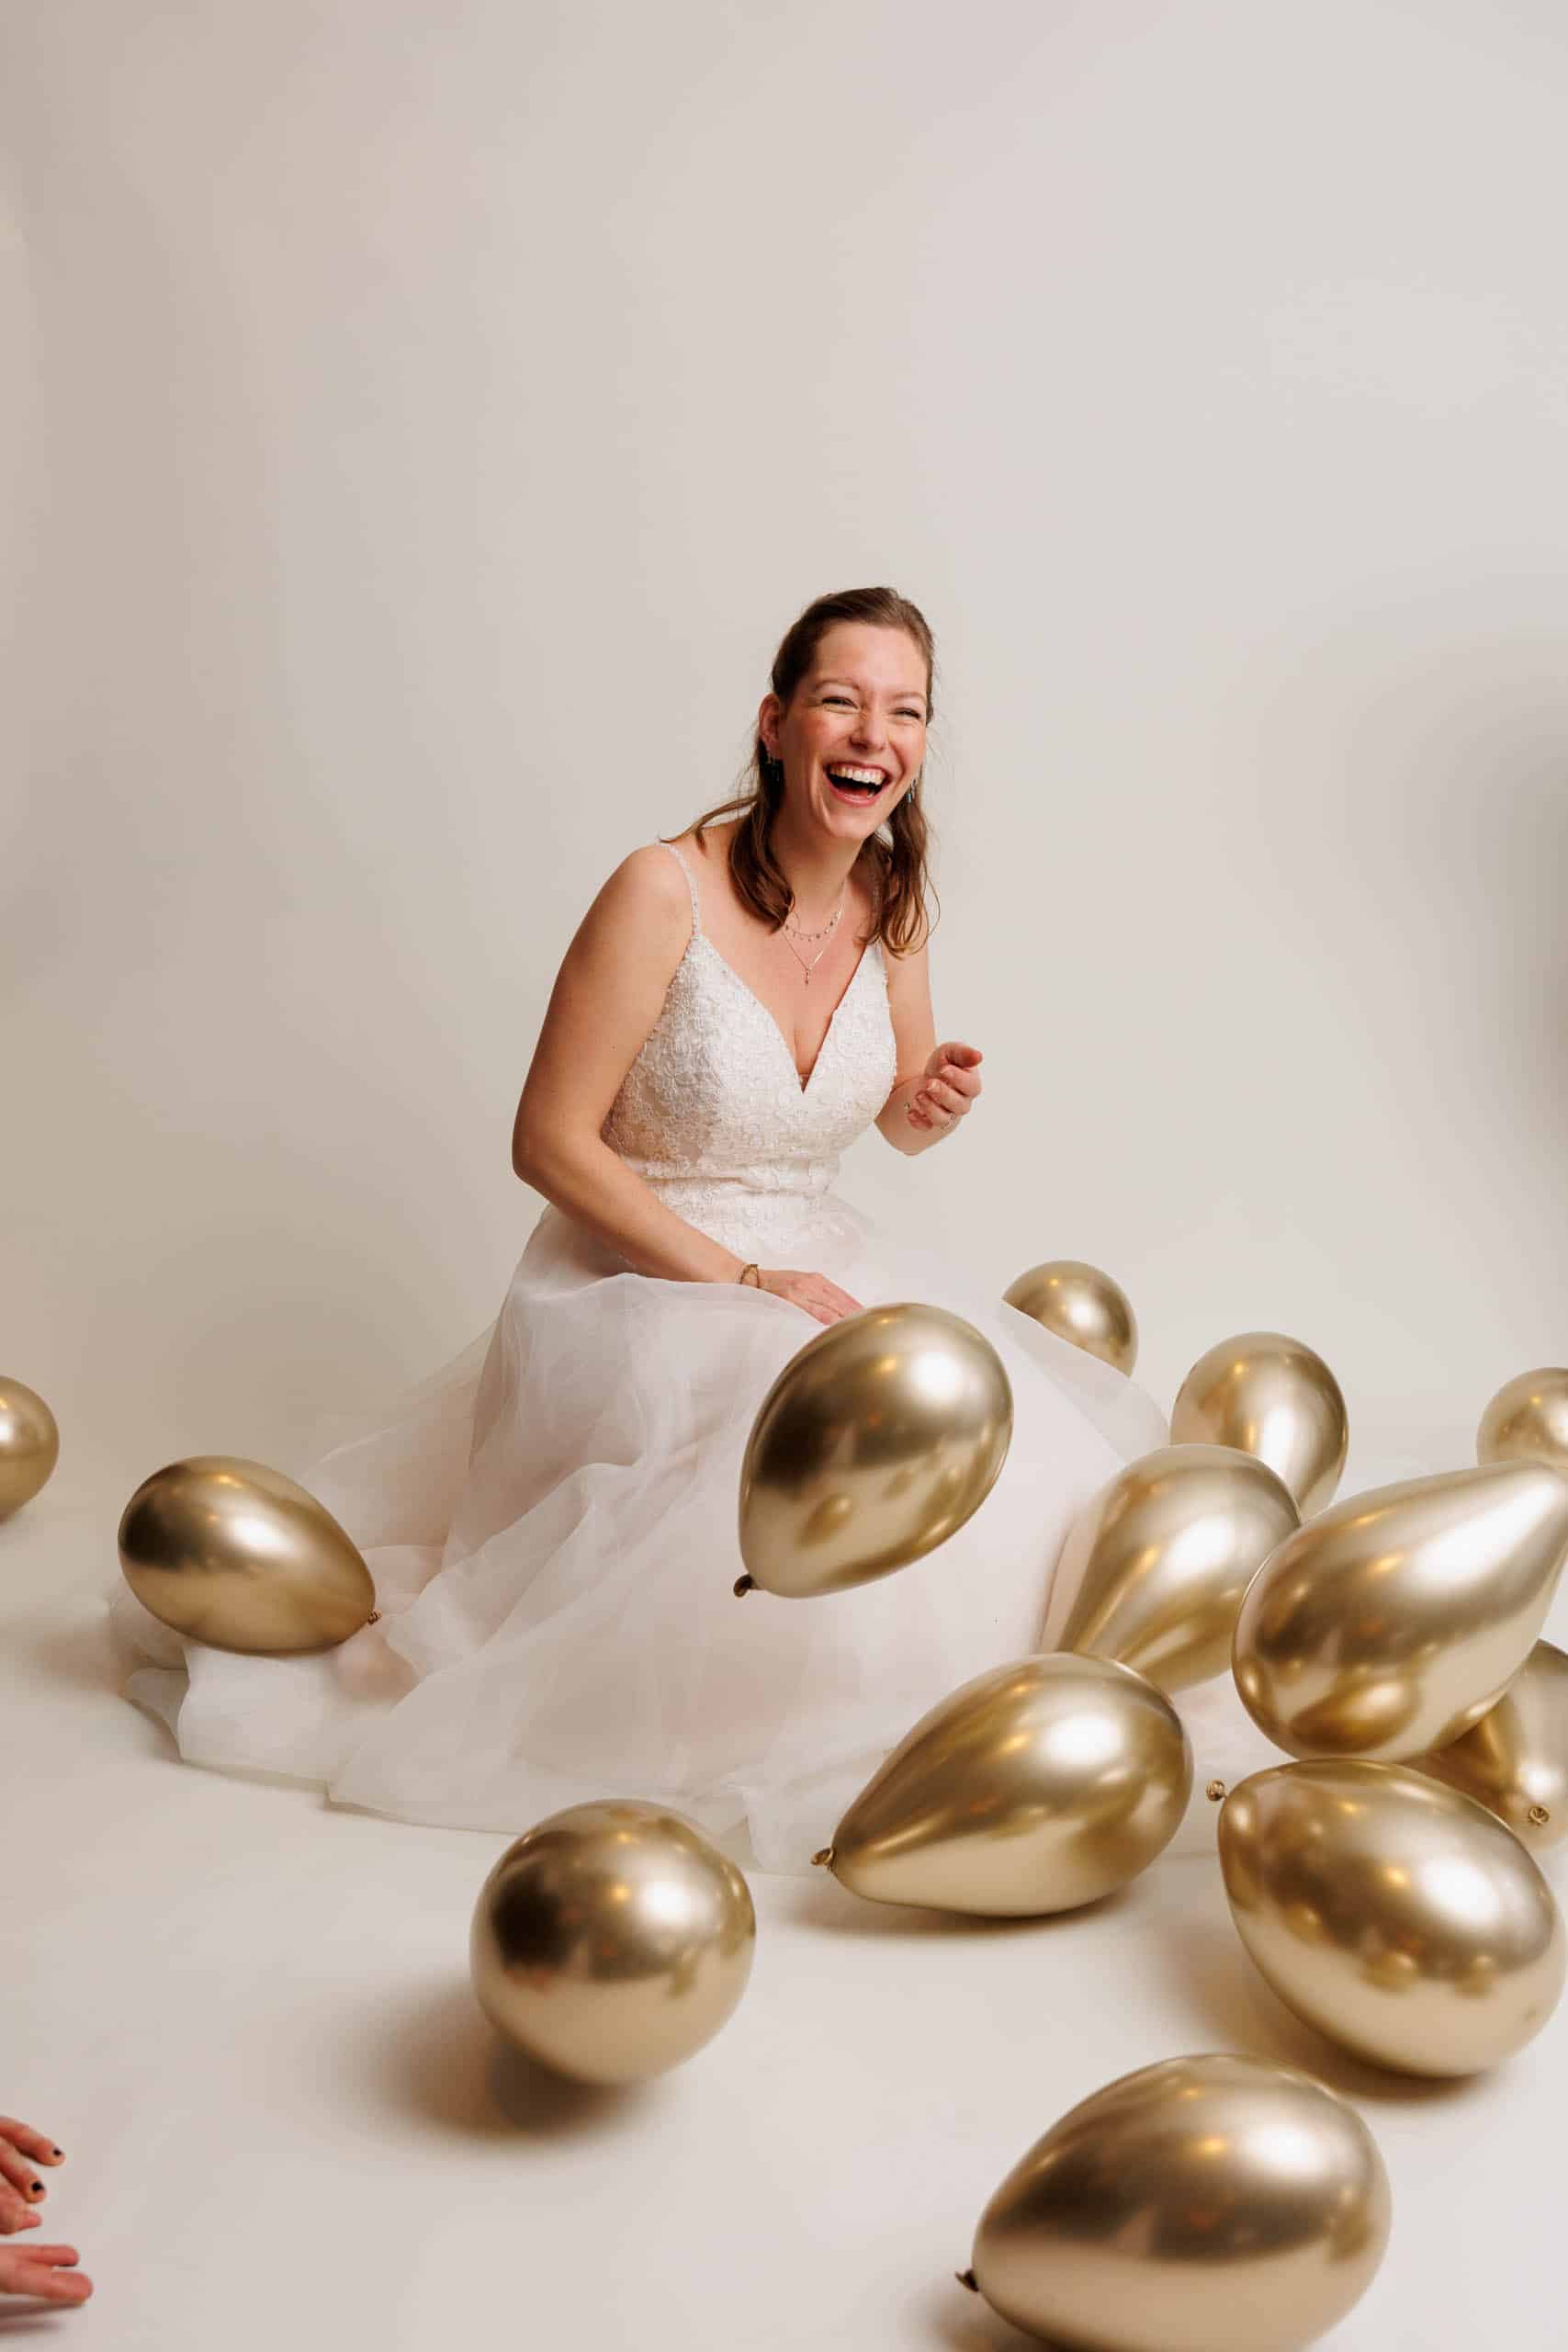 Description : A bride in a white wedding dress with gold balloons around her.